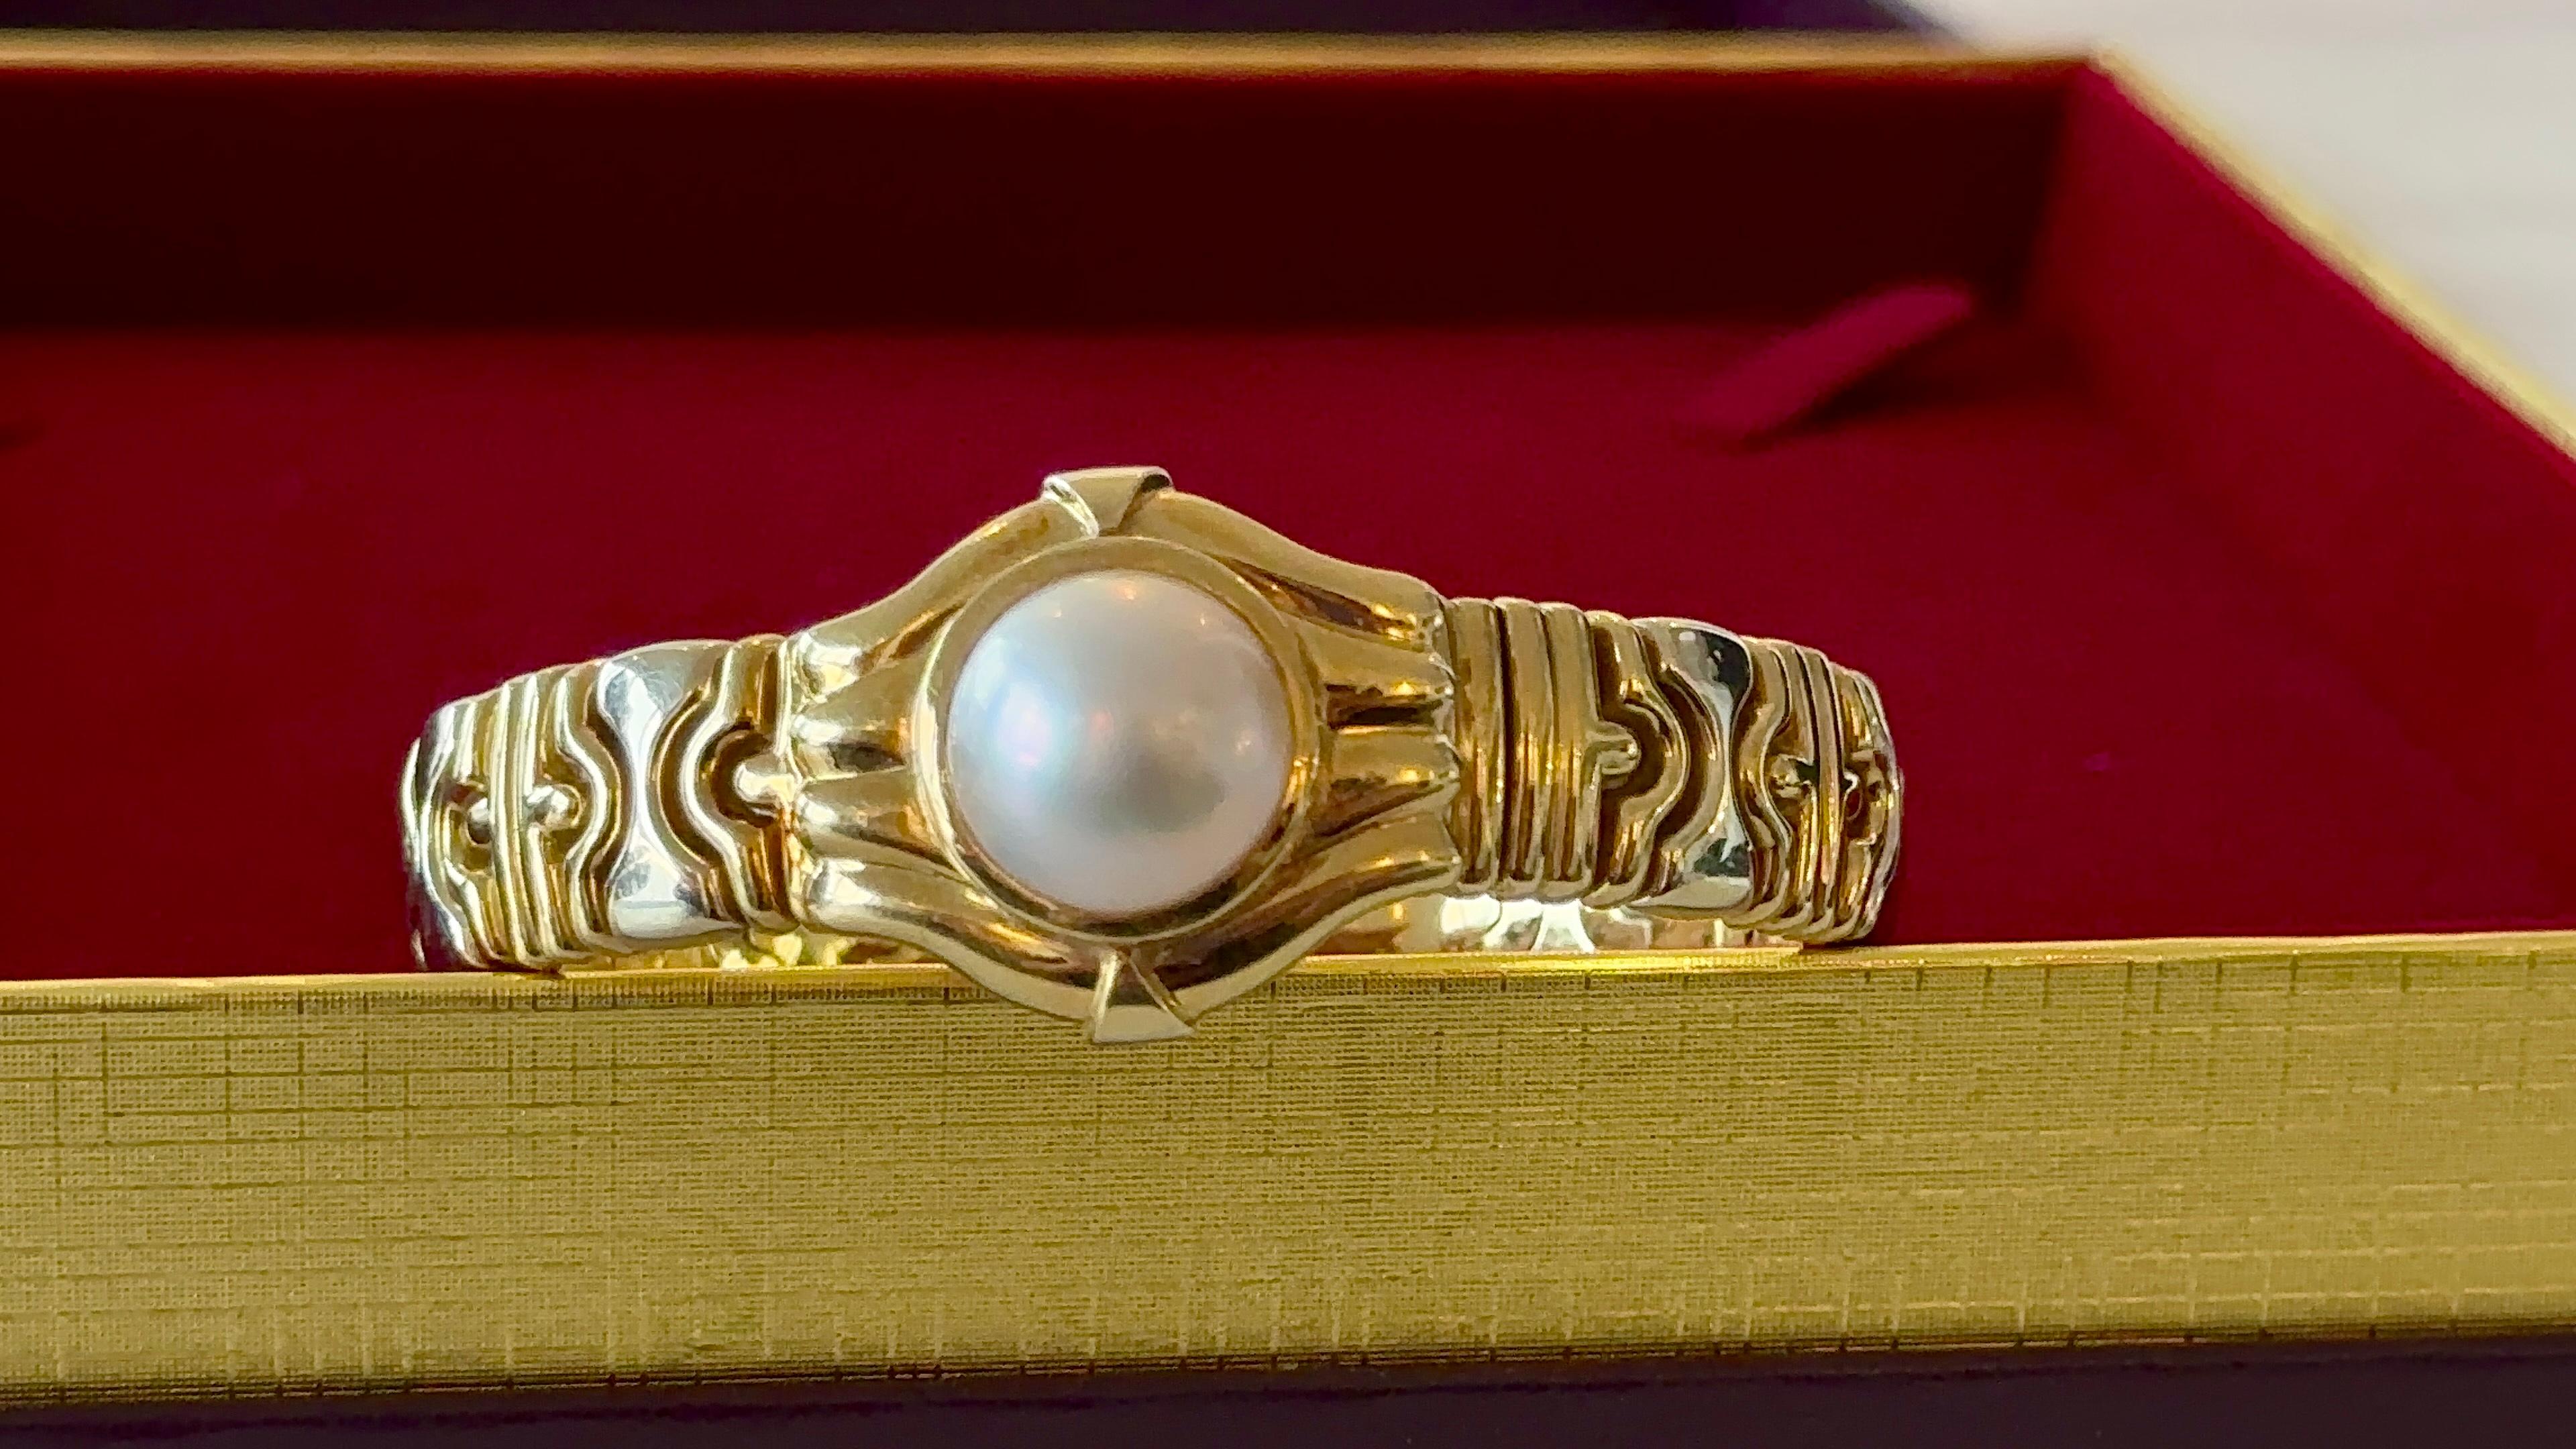 Italian vintage solid gold bracelet with 13.9mm natural pearl set in center. 
Bracelet size: adjustable, open bangle.
Natural pearl size: 13.9 mm.
Metal: 18K solid gold.
Gold weight: 46.6 grams.